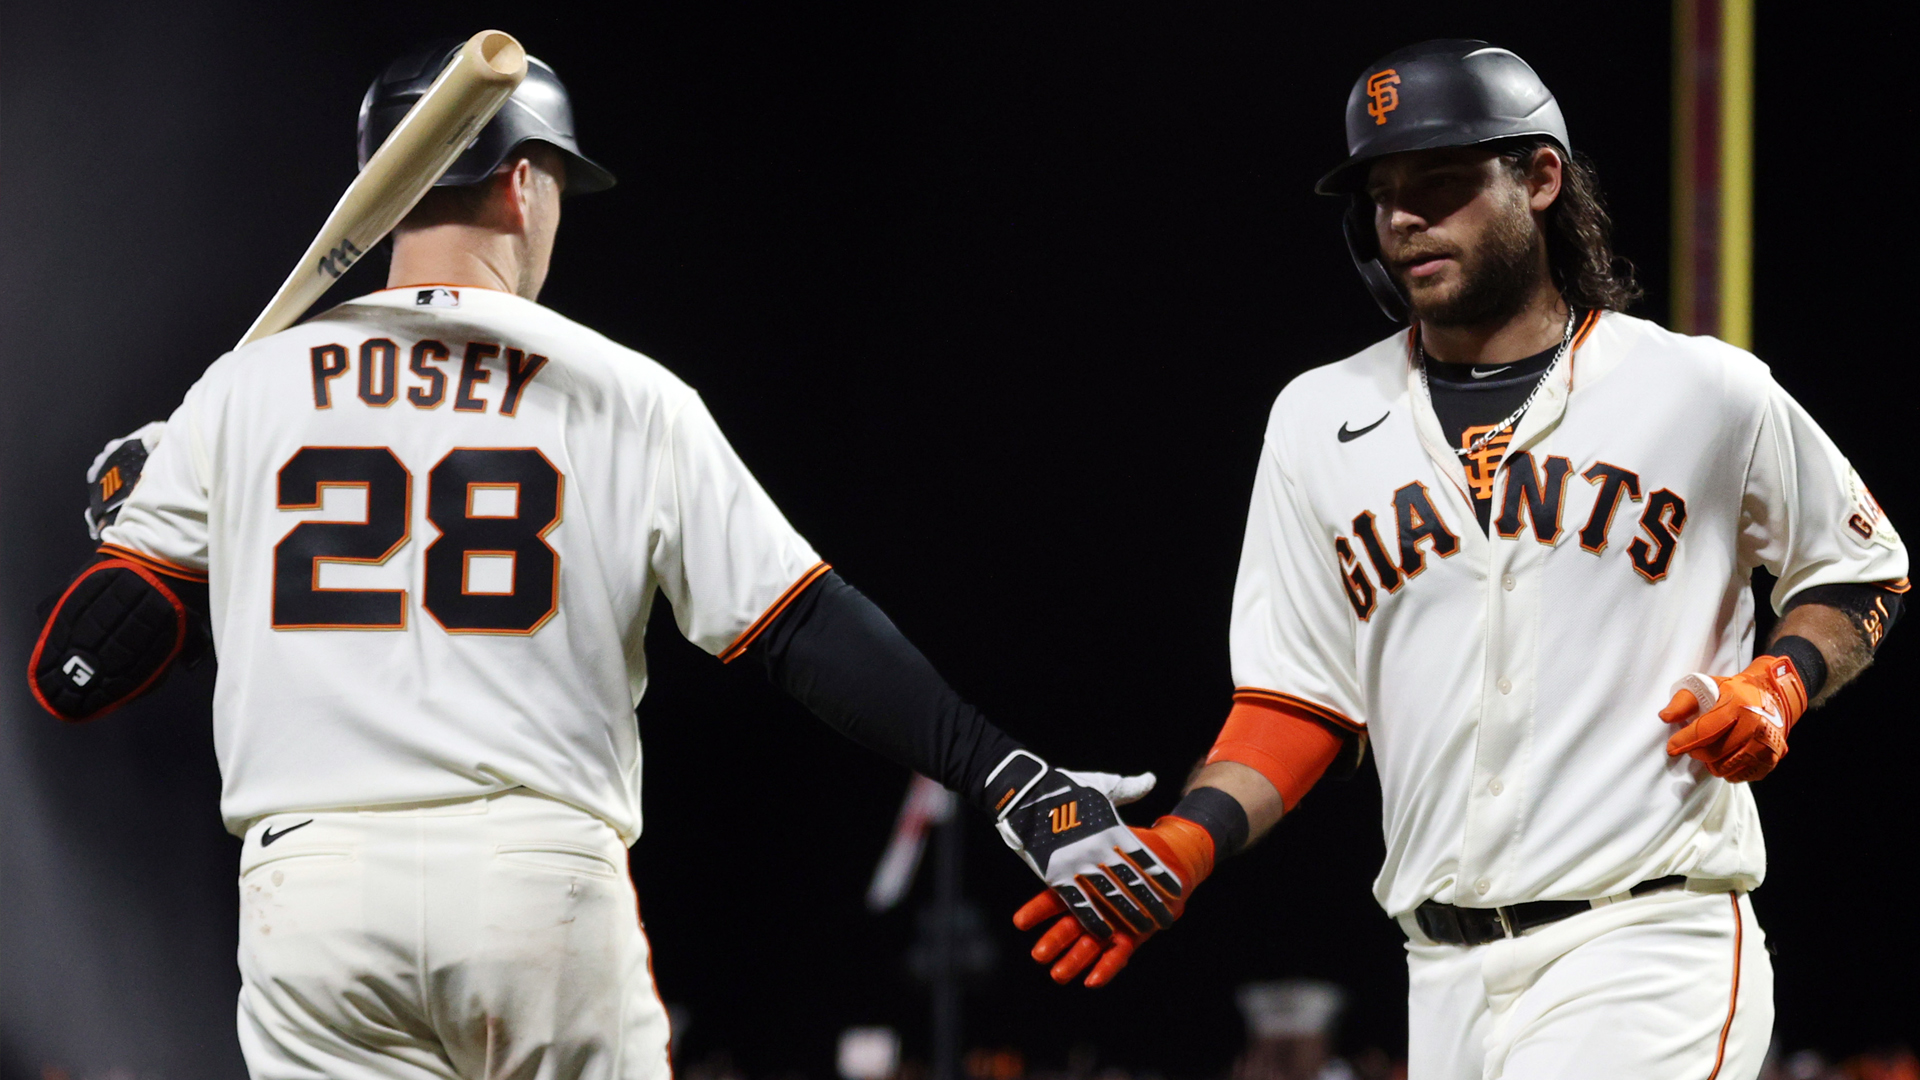 Brandon Crawford has highest Giants MVP finish since Buster Posey